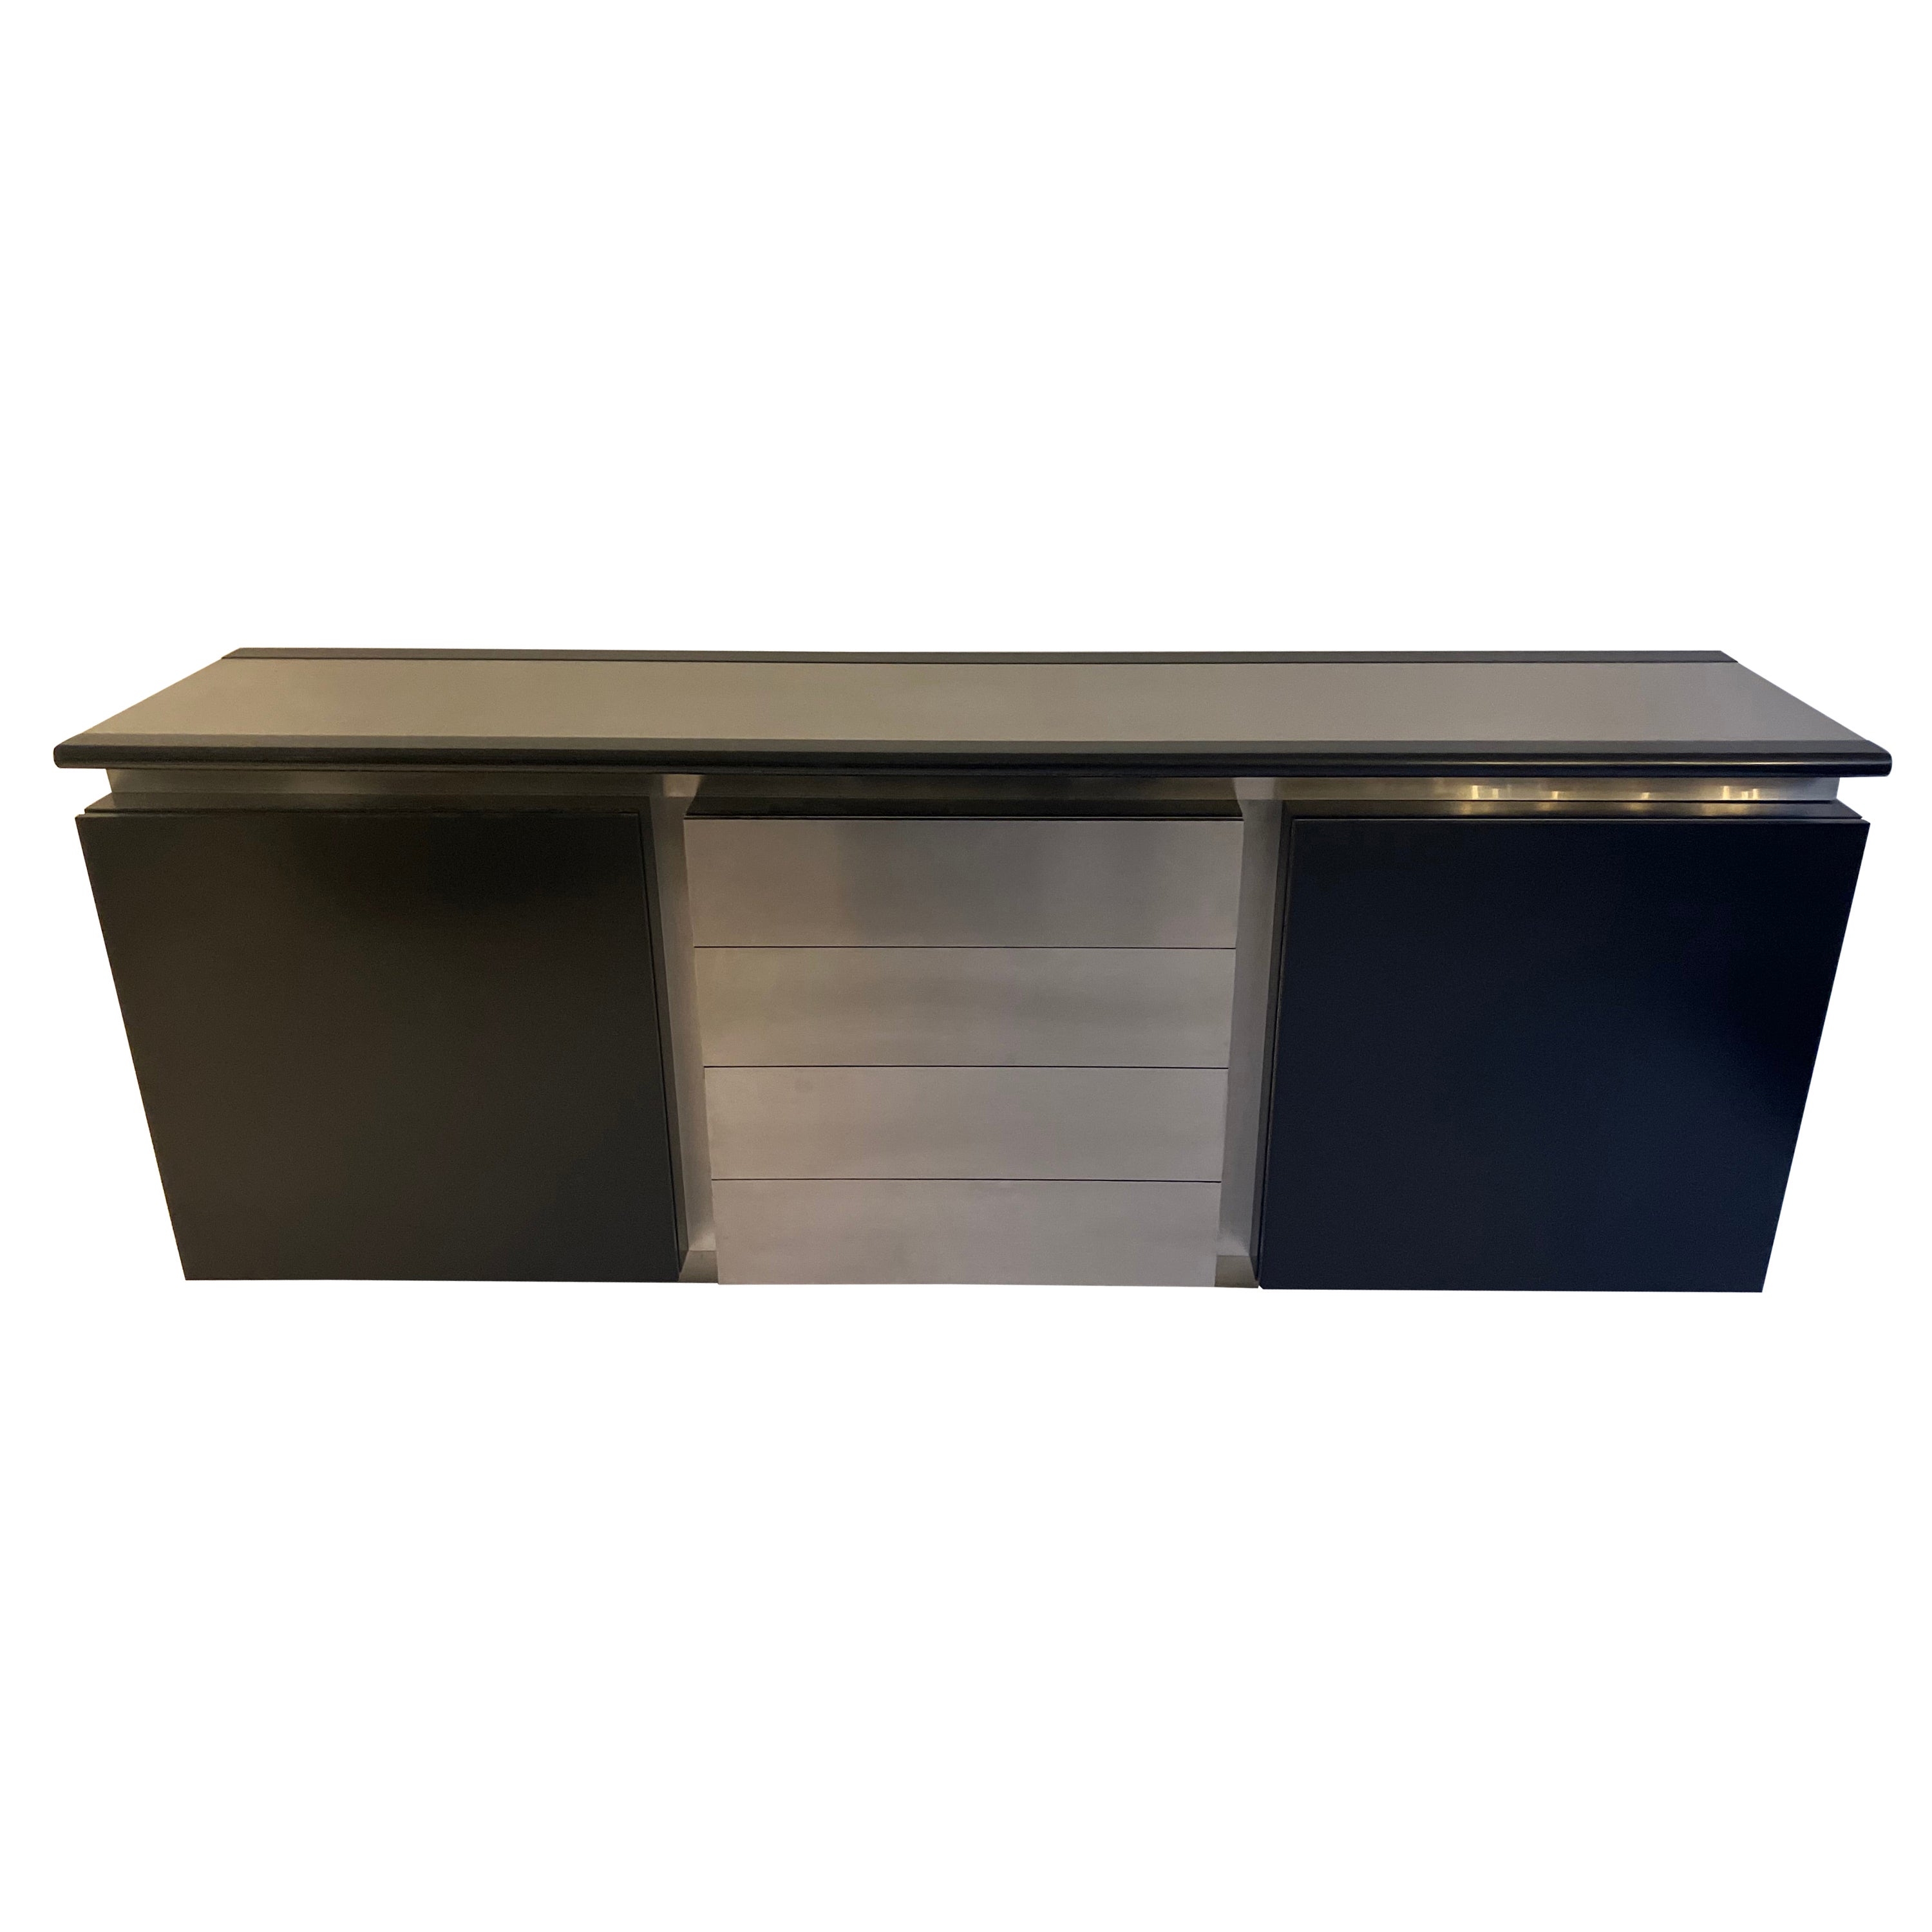 Acerbis Side Cabinet in Black Lacquer and Brushed Steel Italian, circa 1970s For Sale